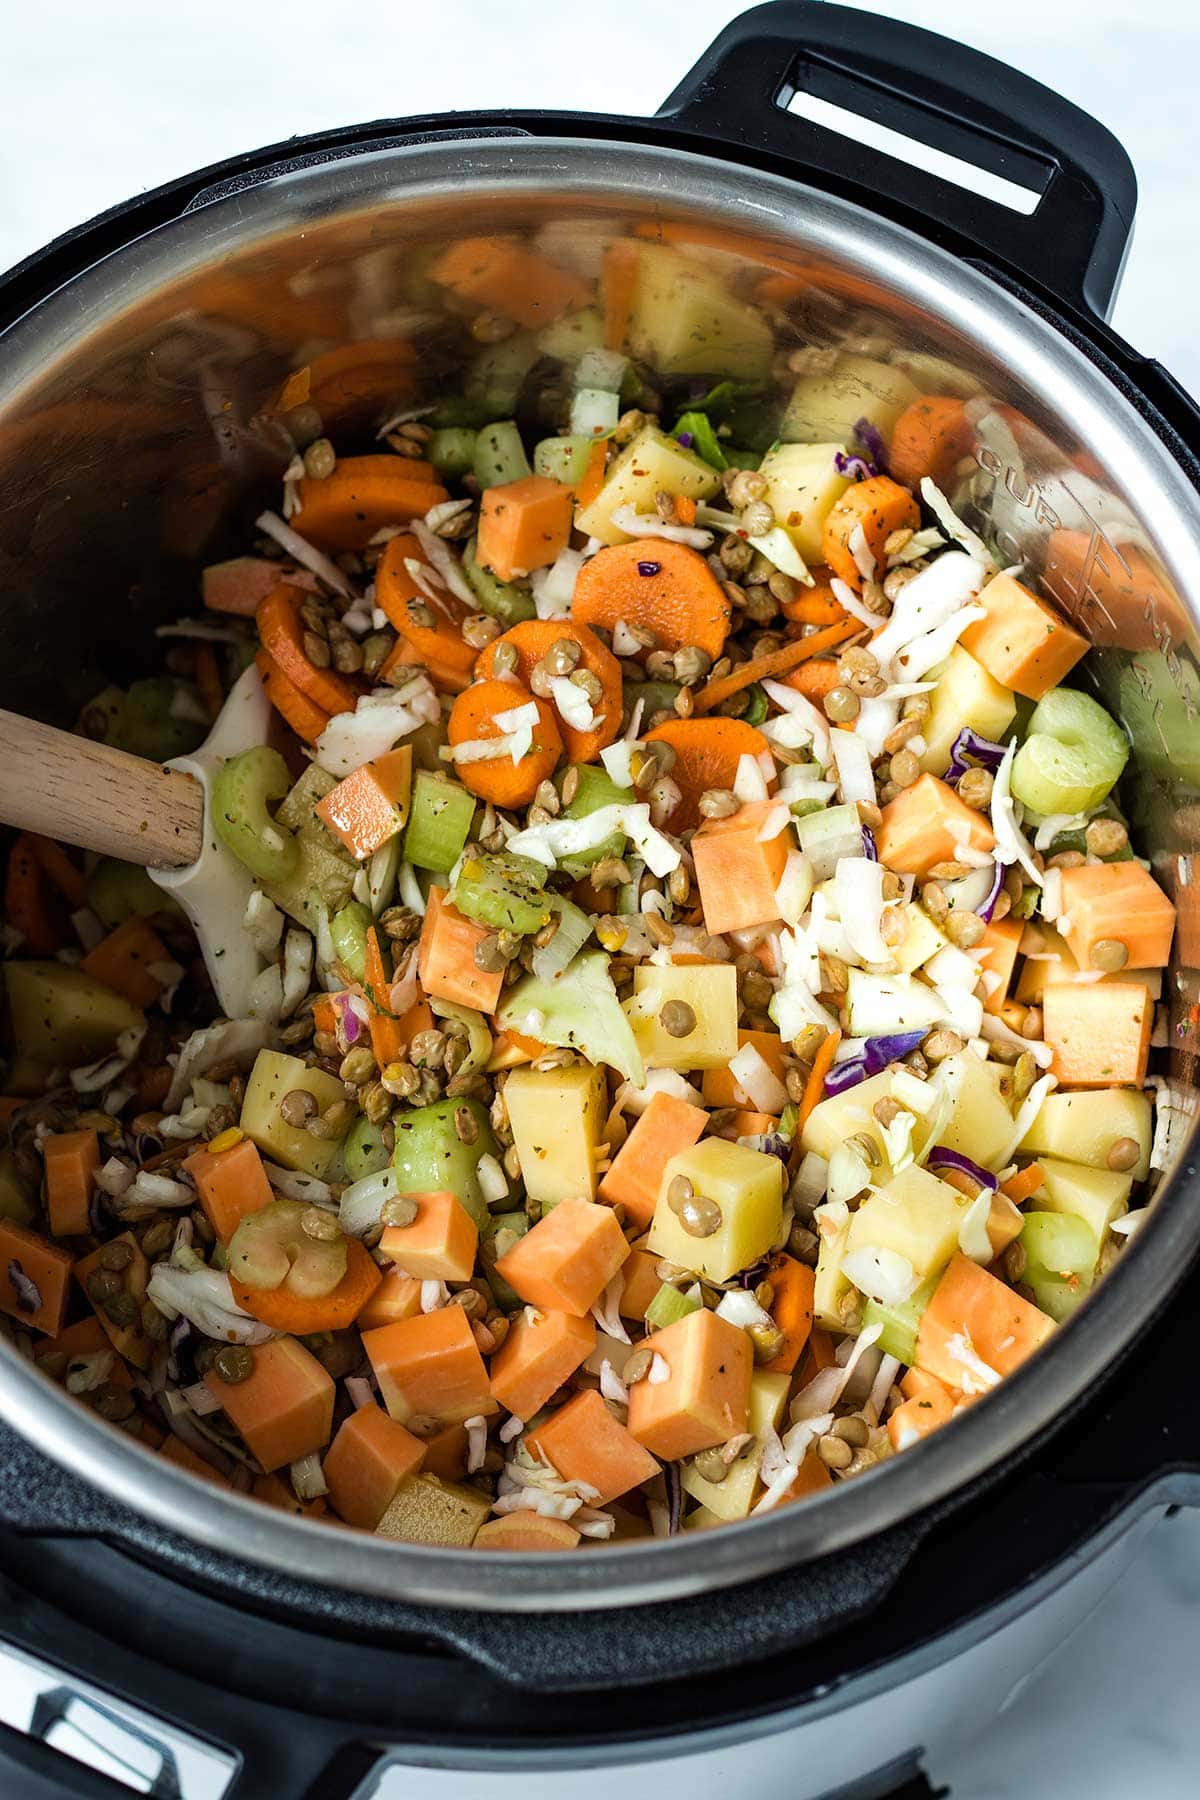 Lentils, vegetables and seasoning mixed together with a spatula in an Instant Pot.